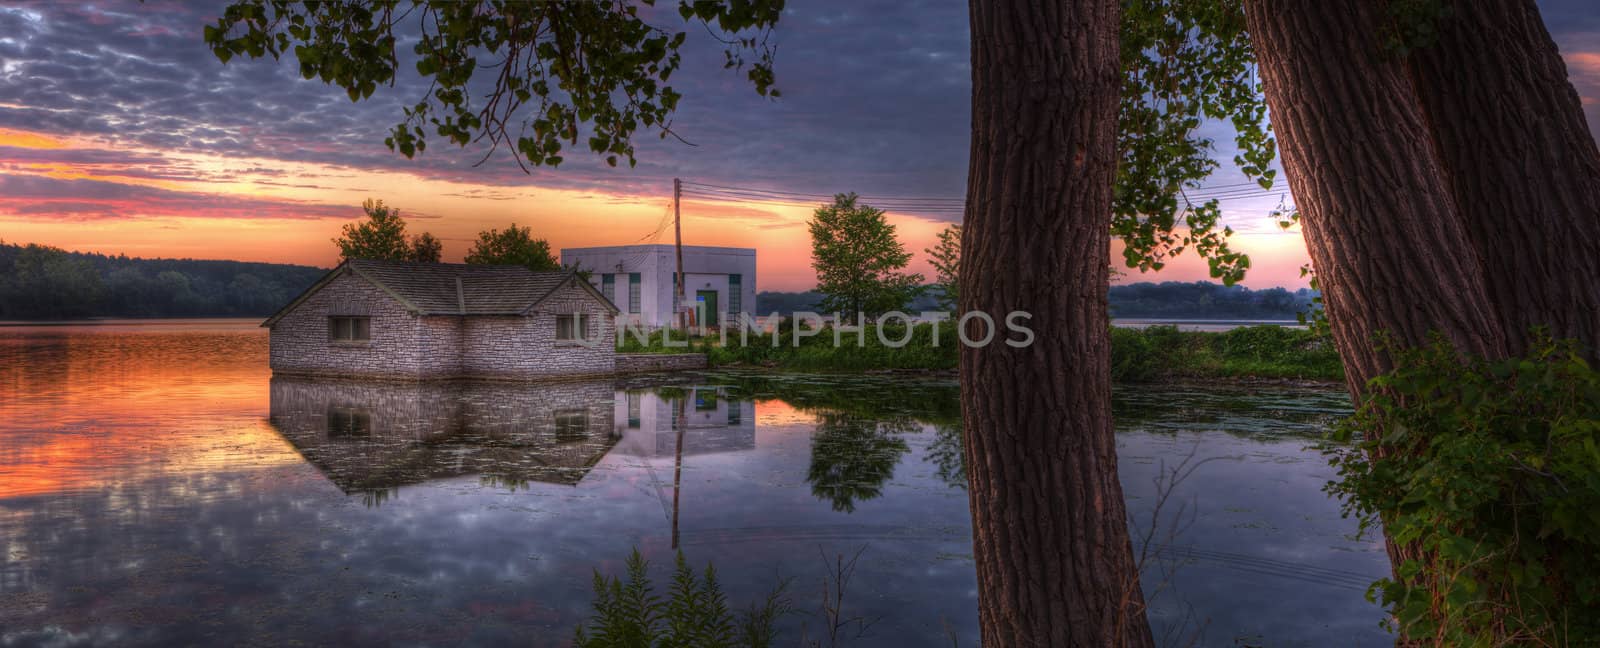 Sunrise panorama of a pump house utility building by Coffee999